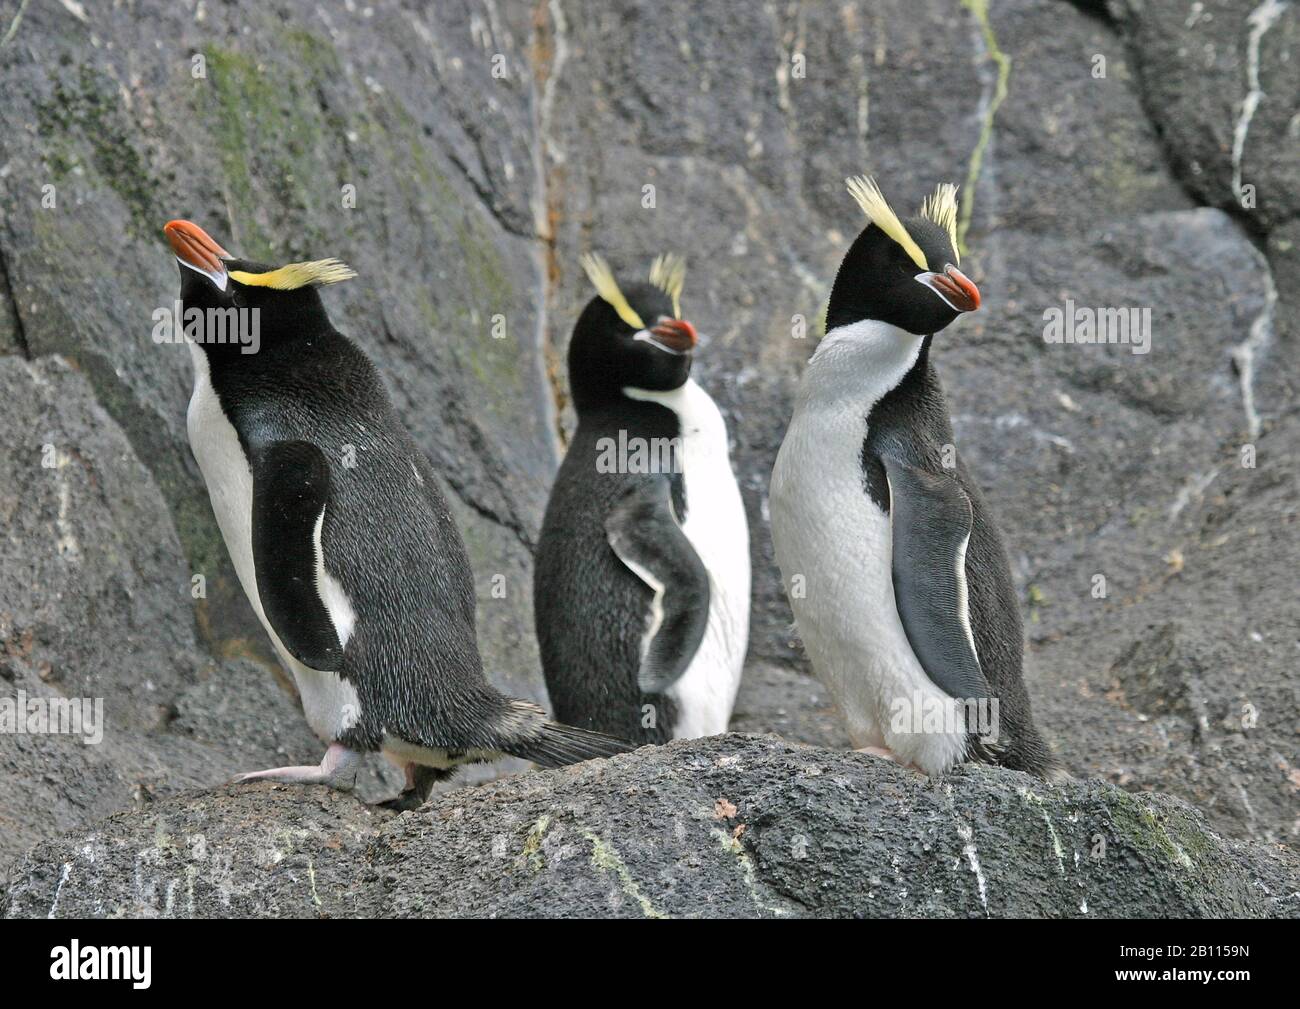 big-crested penguin (Eudyptes sclateri), three big-crested penguin stand on a rock, New Zealand Stock Photo